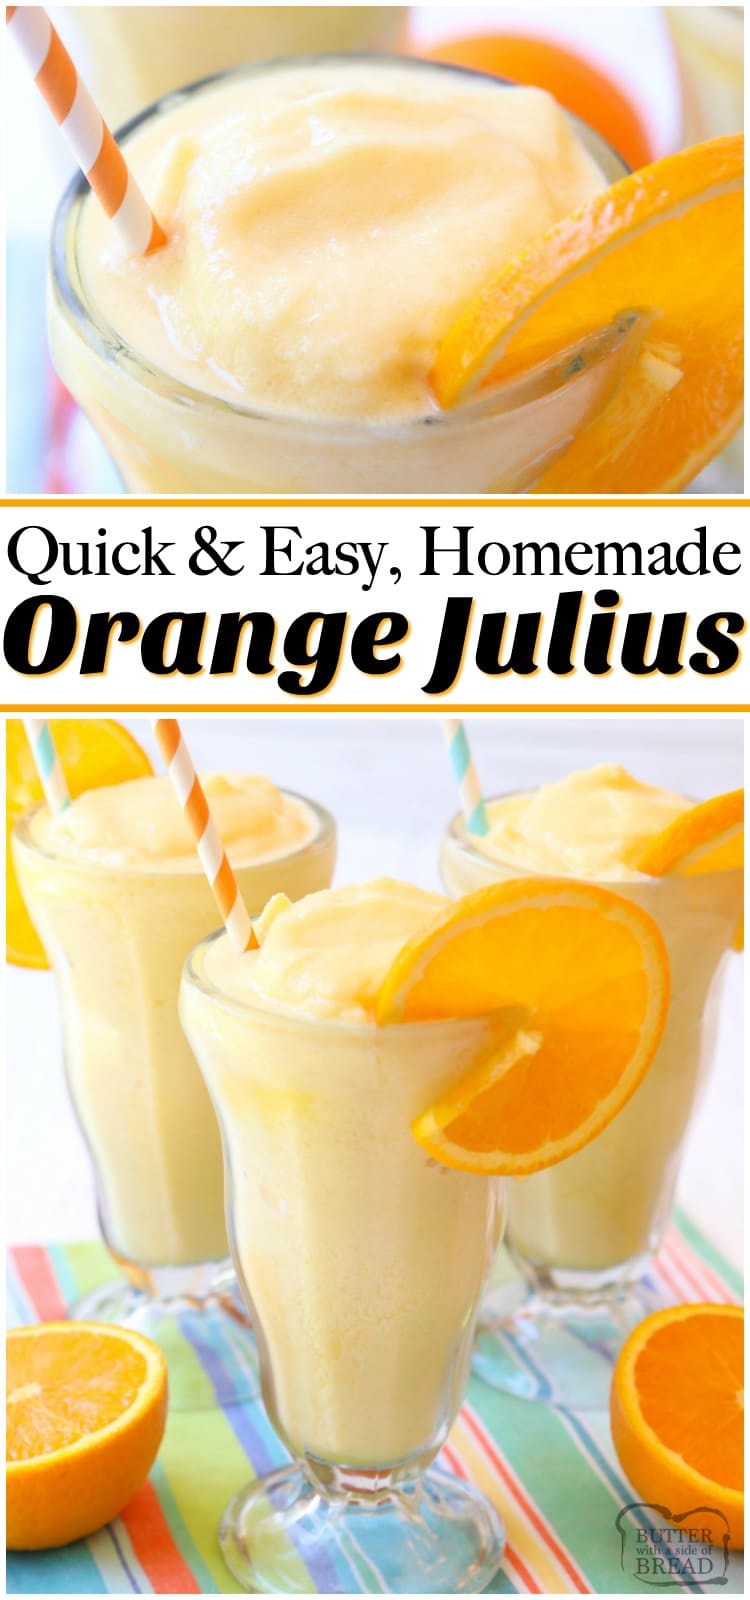 Orange Julius recipe made EASY! Just 5 ingredients & 5 minutes to enjoy a refreshing, sweet, citrusy frozen beverage at home. Perfect orange flavor and simple instructions with video that show how to make an Orange Julius.